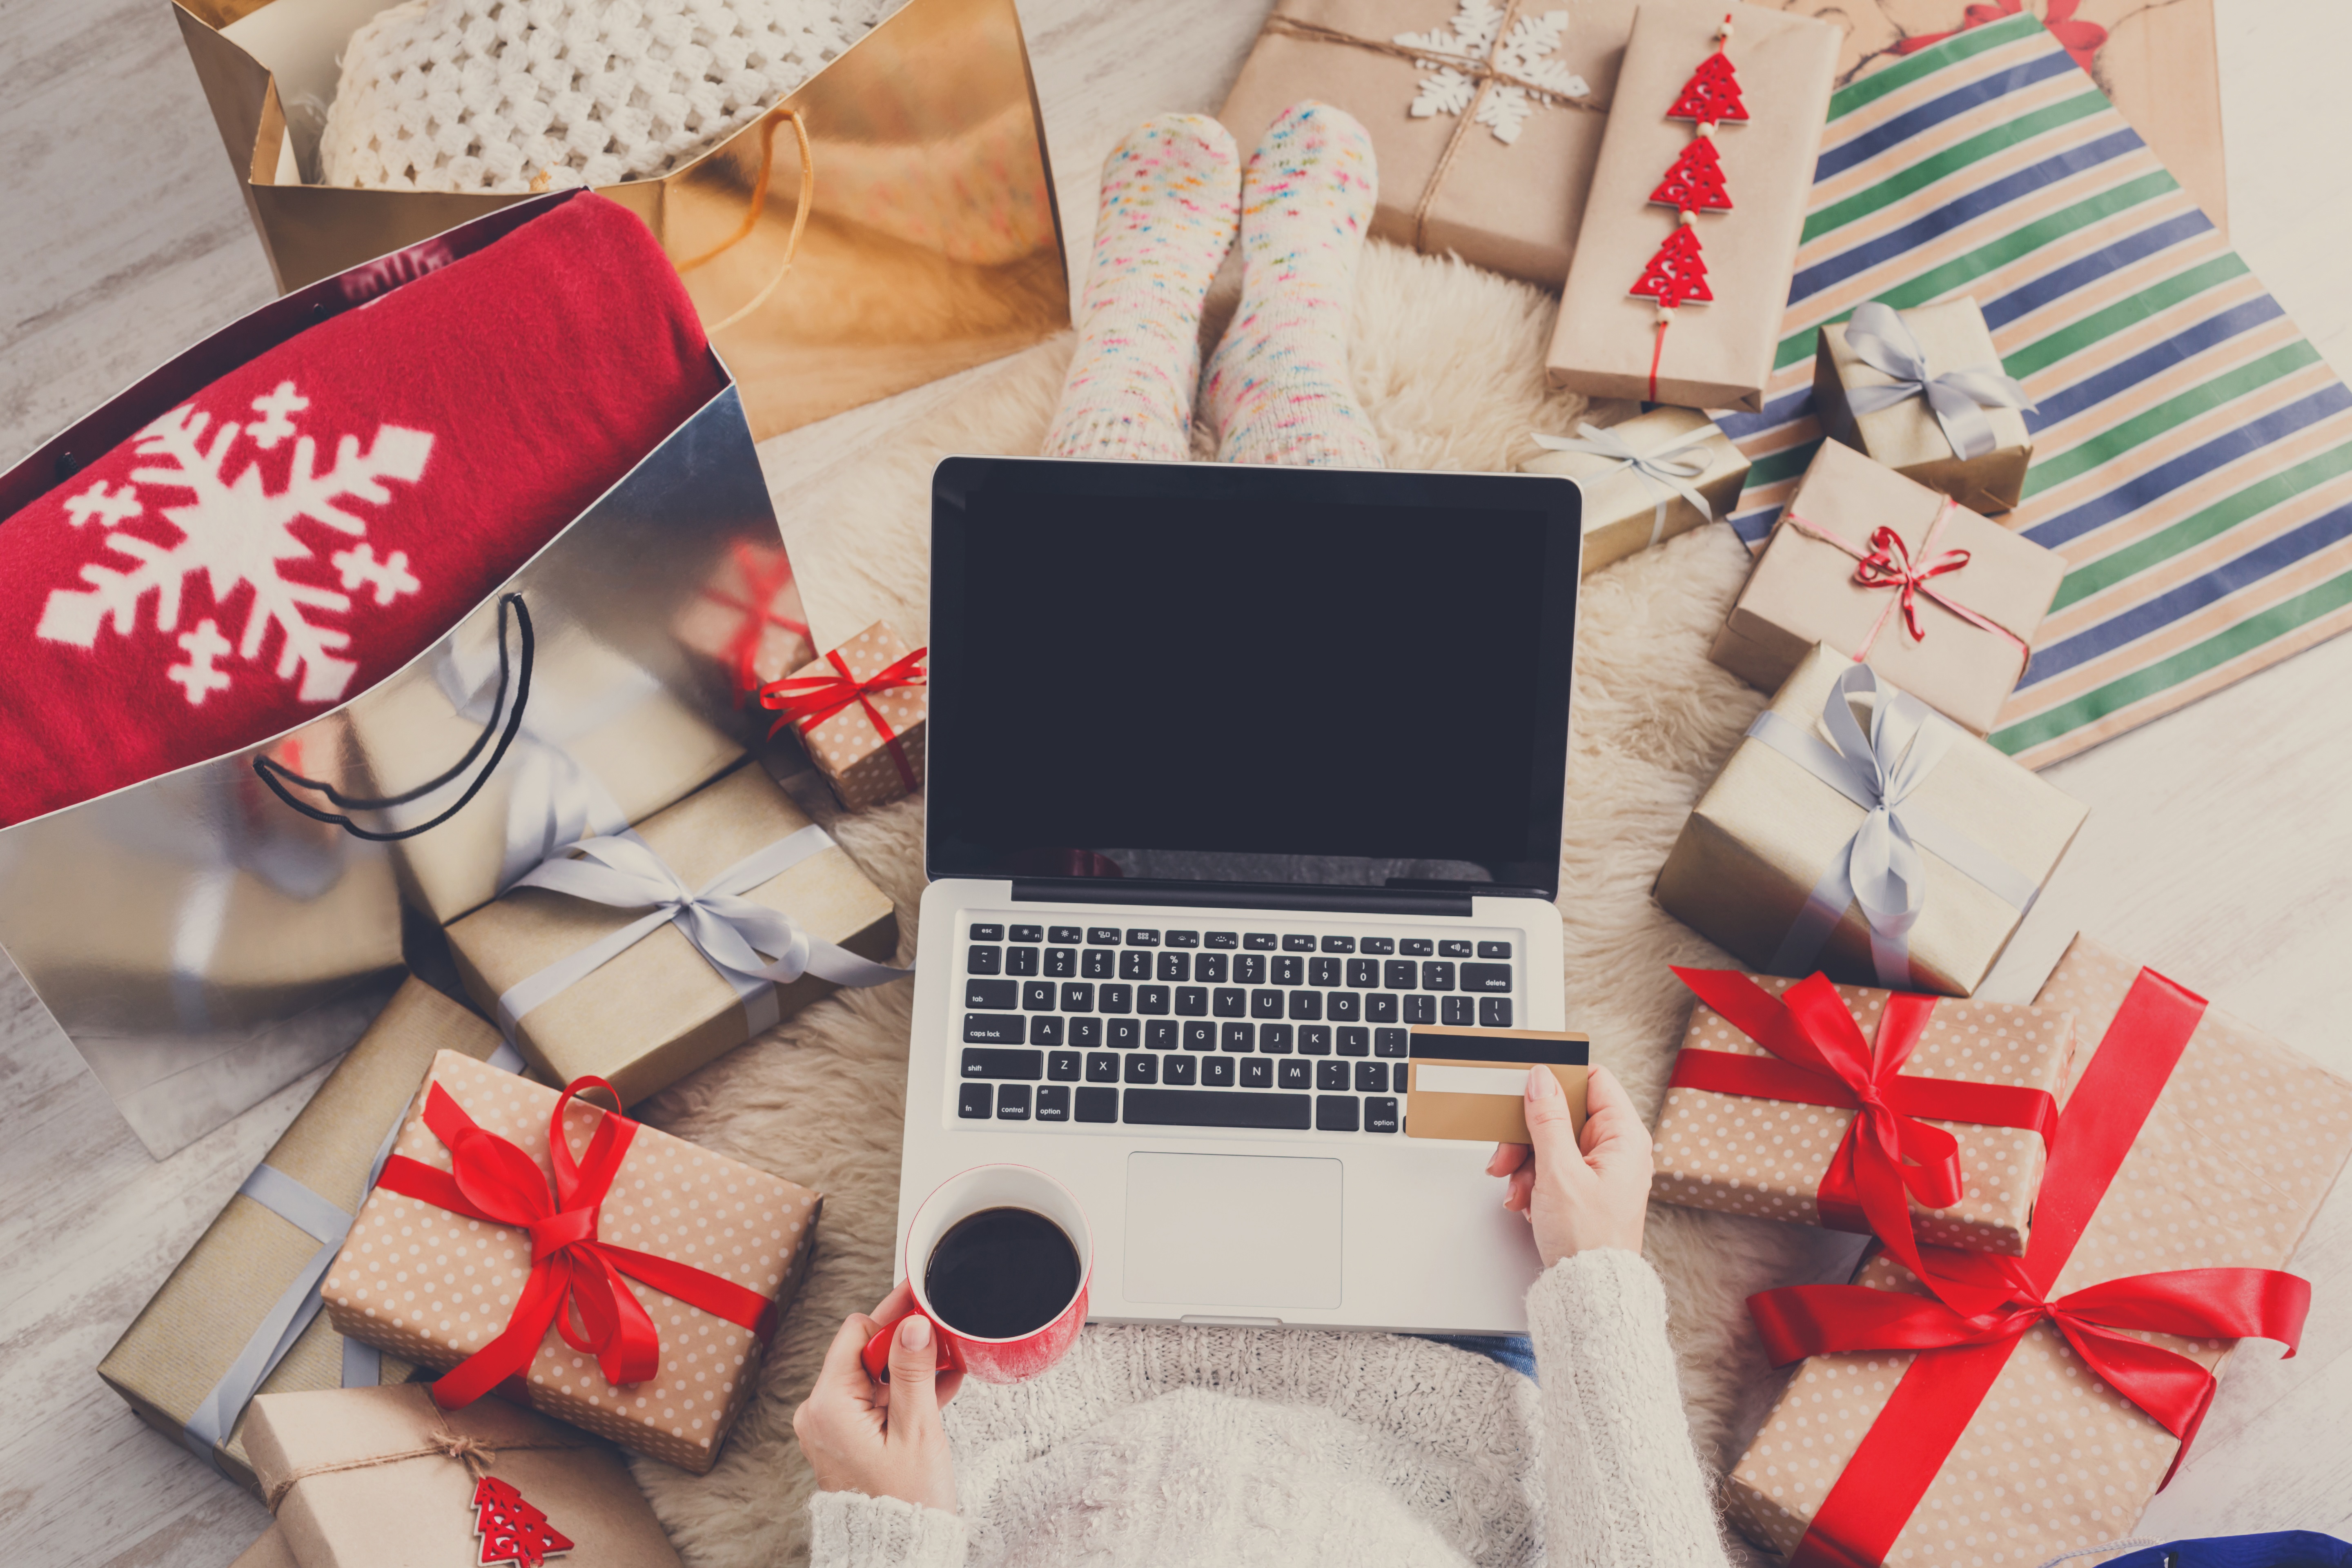 A laptop, about to be used for online shopping, is being operated from a female perspective, as she looks at her credit card and sips a cup of coffee amidst a pile of colorful Christmas gifts.